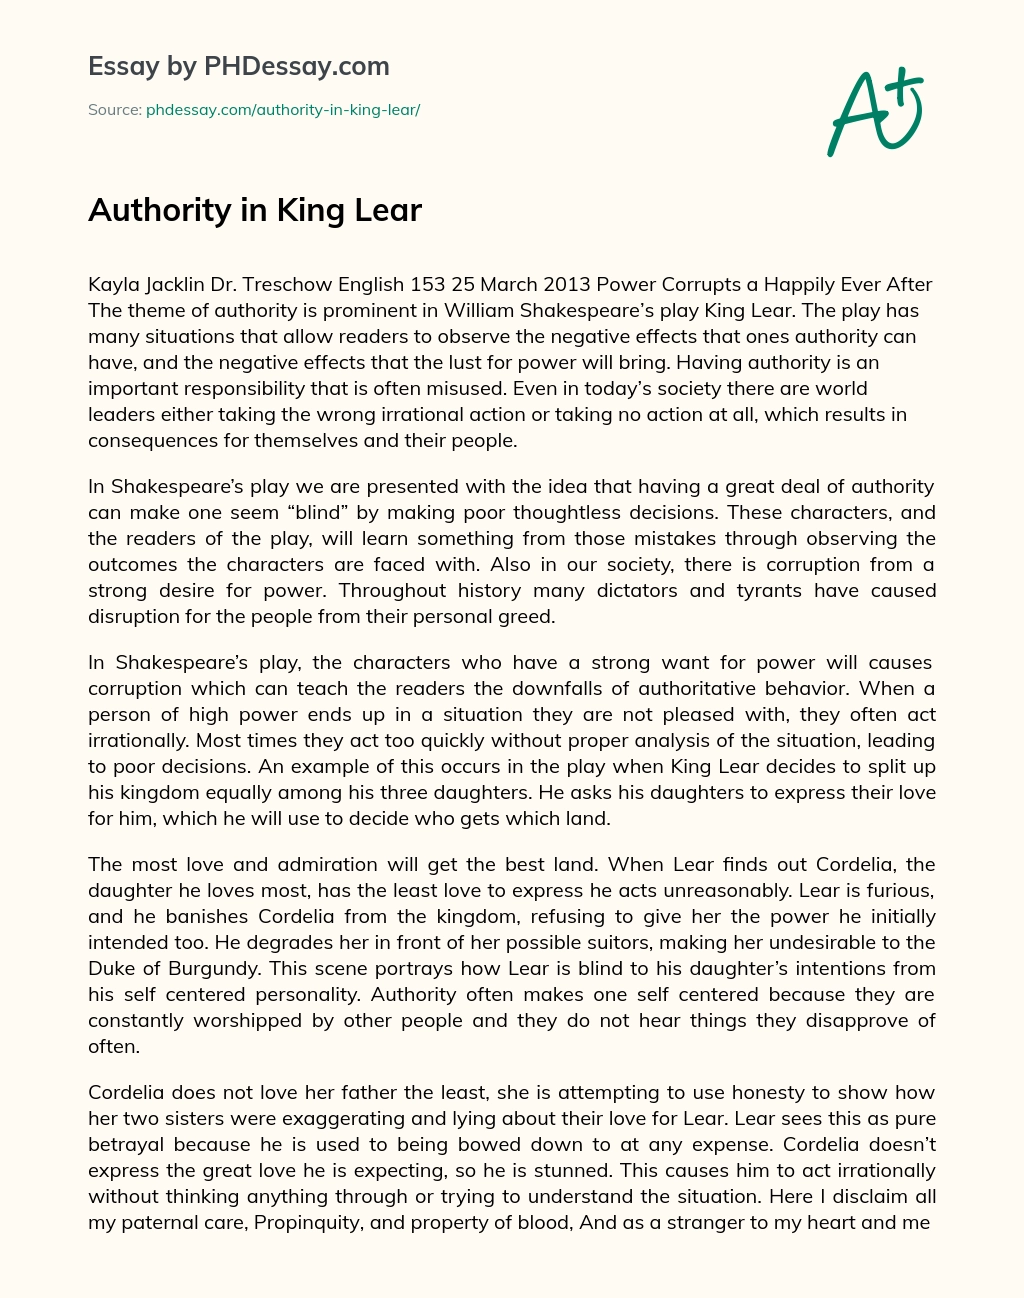 Authority in King Lear essay